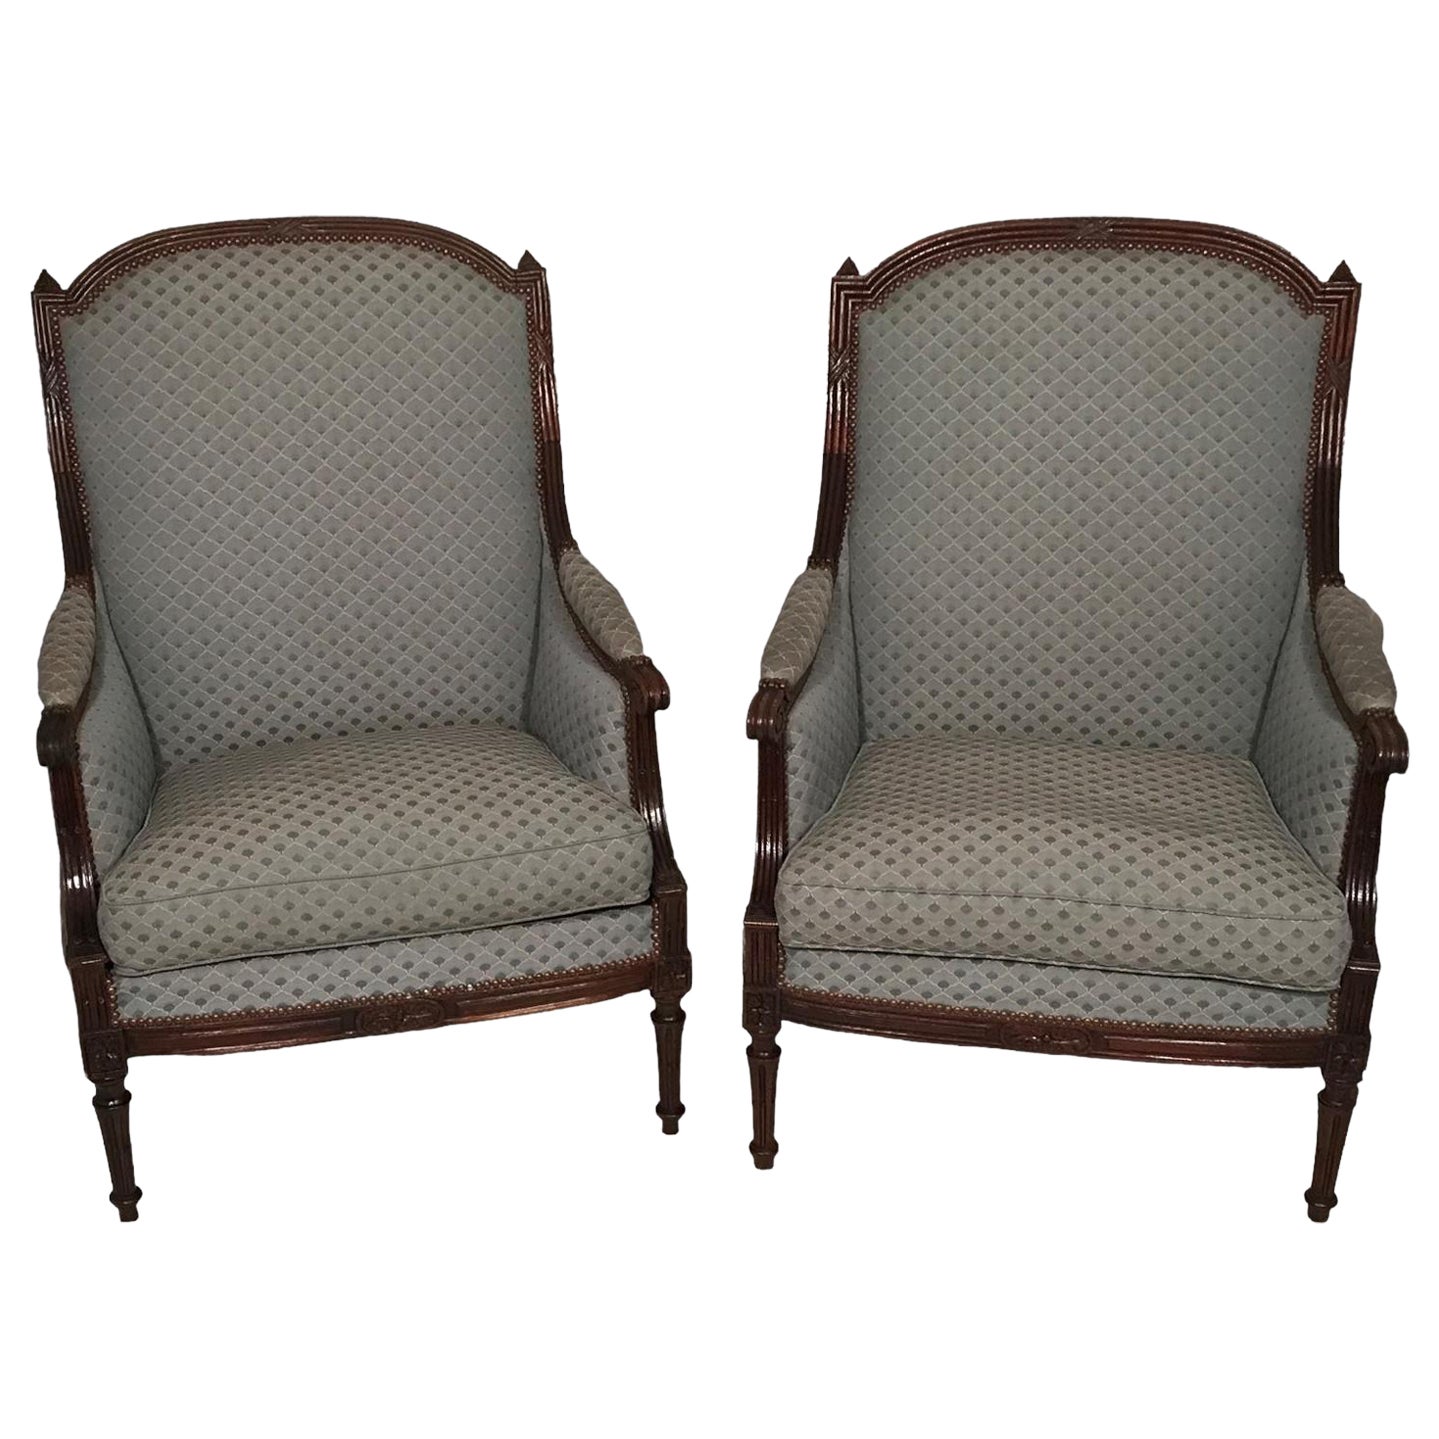 Louis XVI Style Bergere Armchairs, France, 19th Century